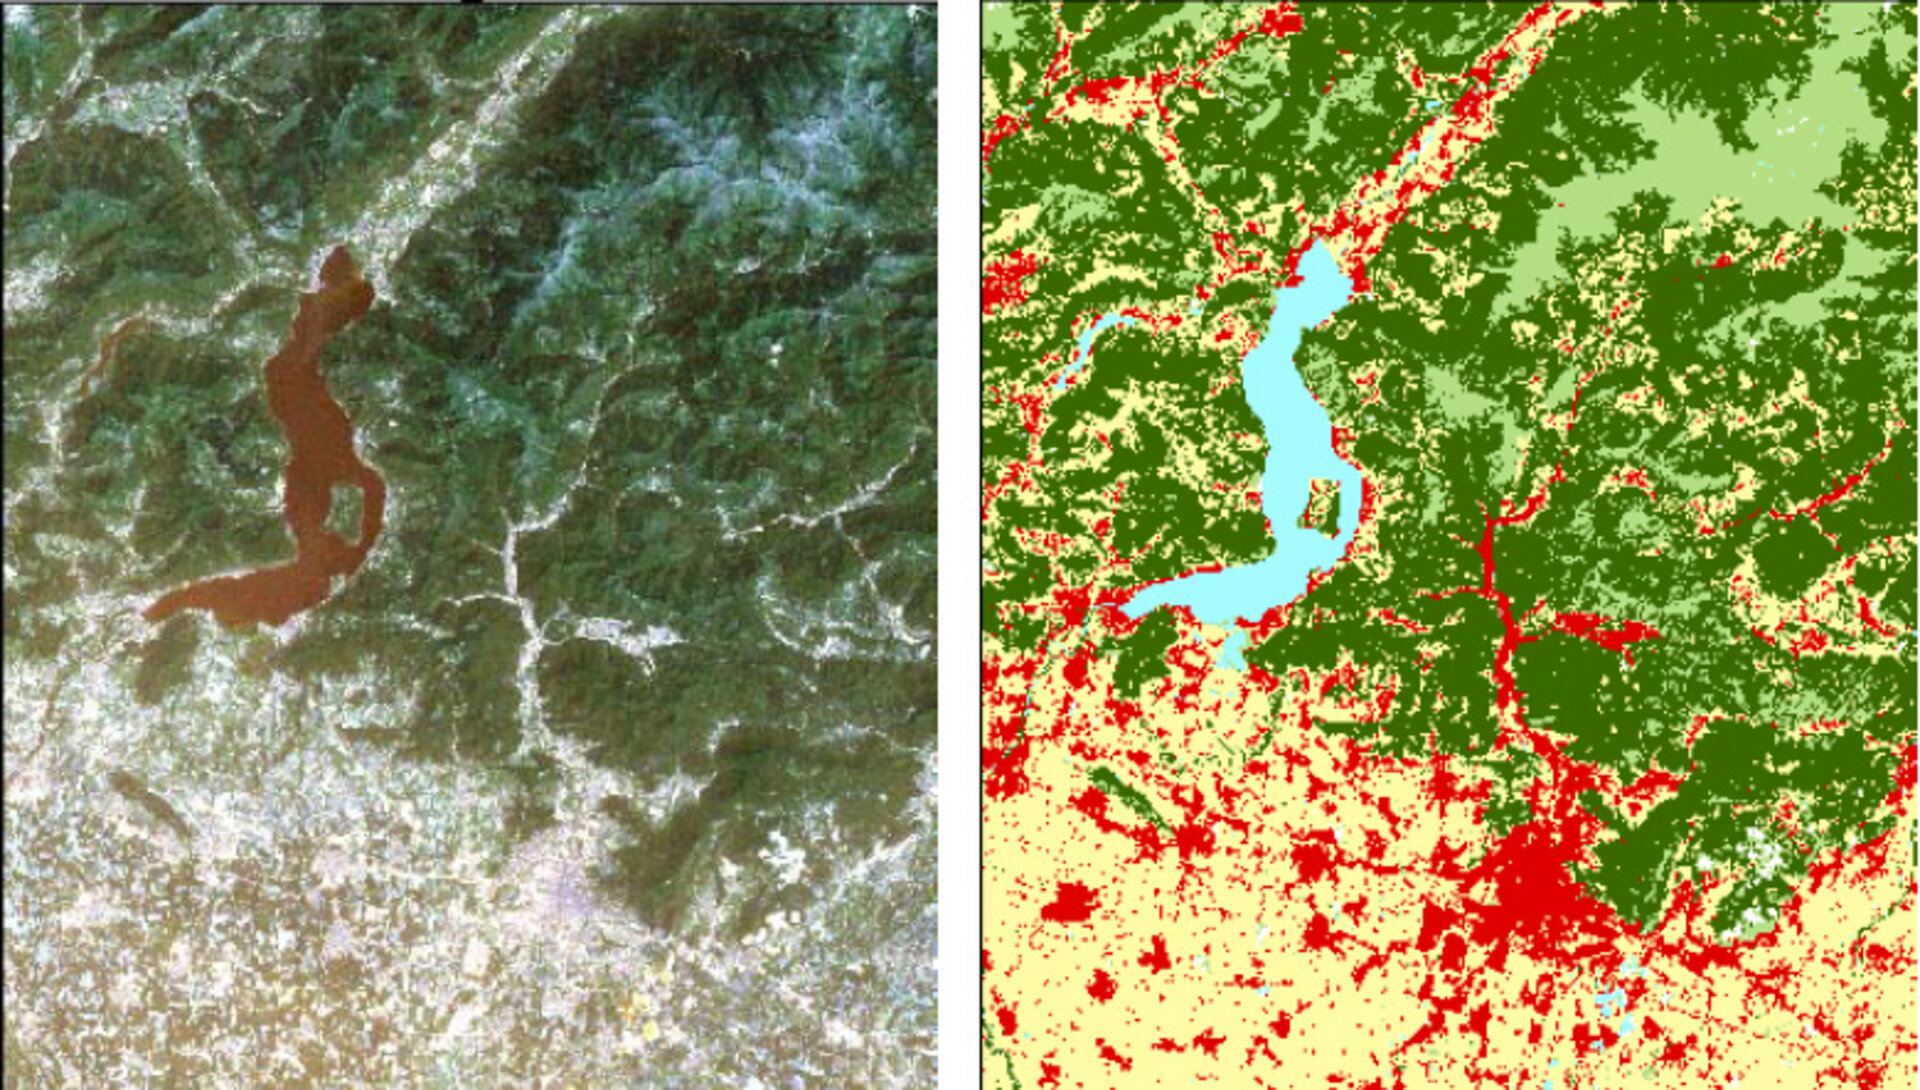 Satellite image and derived land use map for Lombardy, Italy